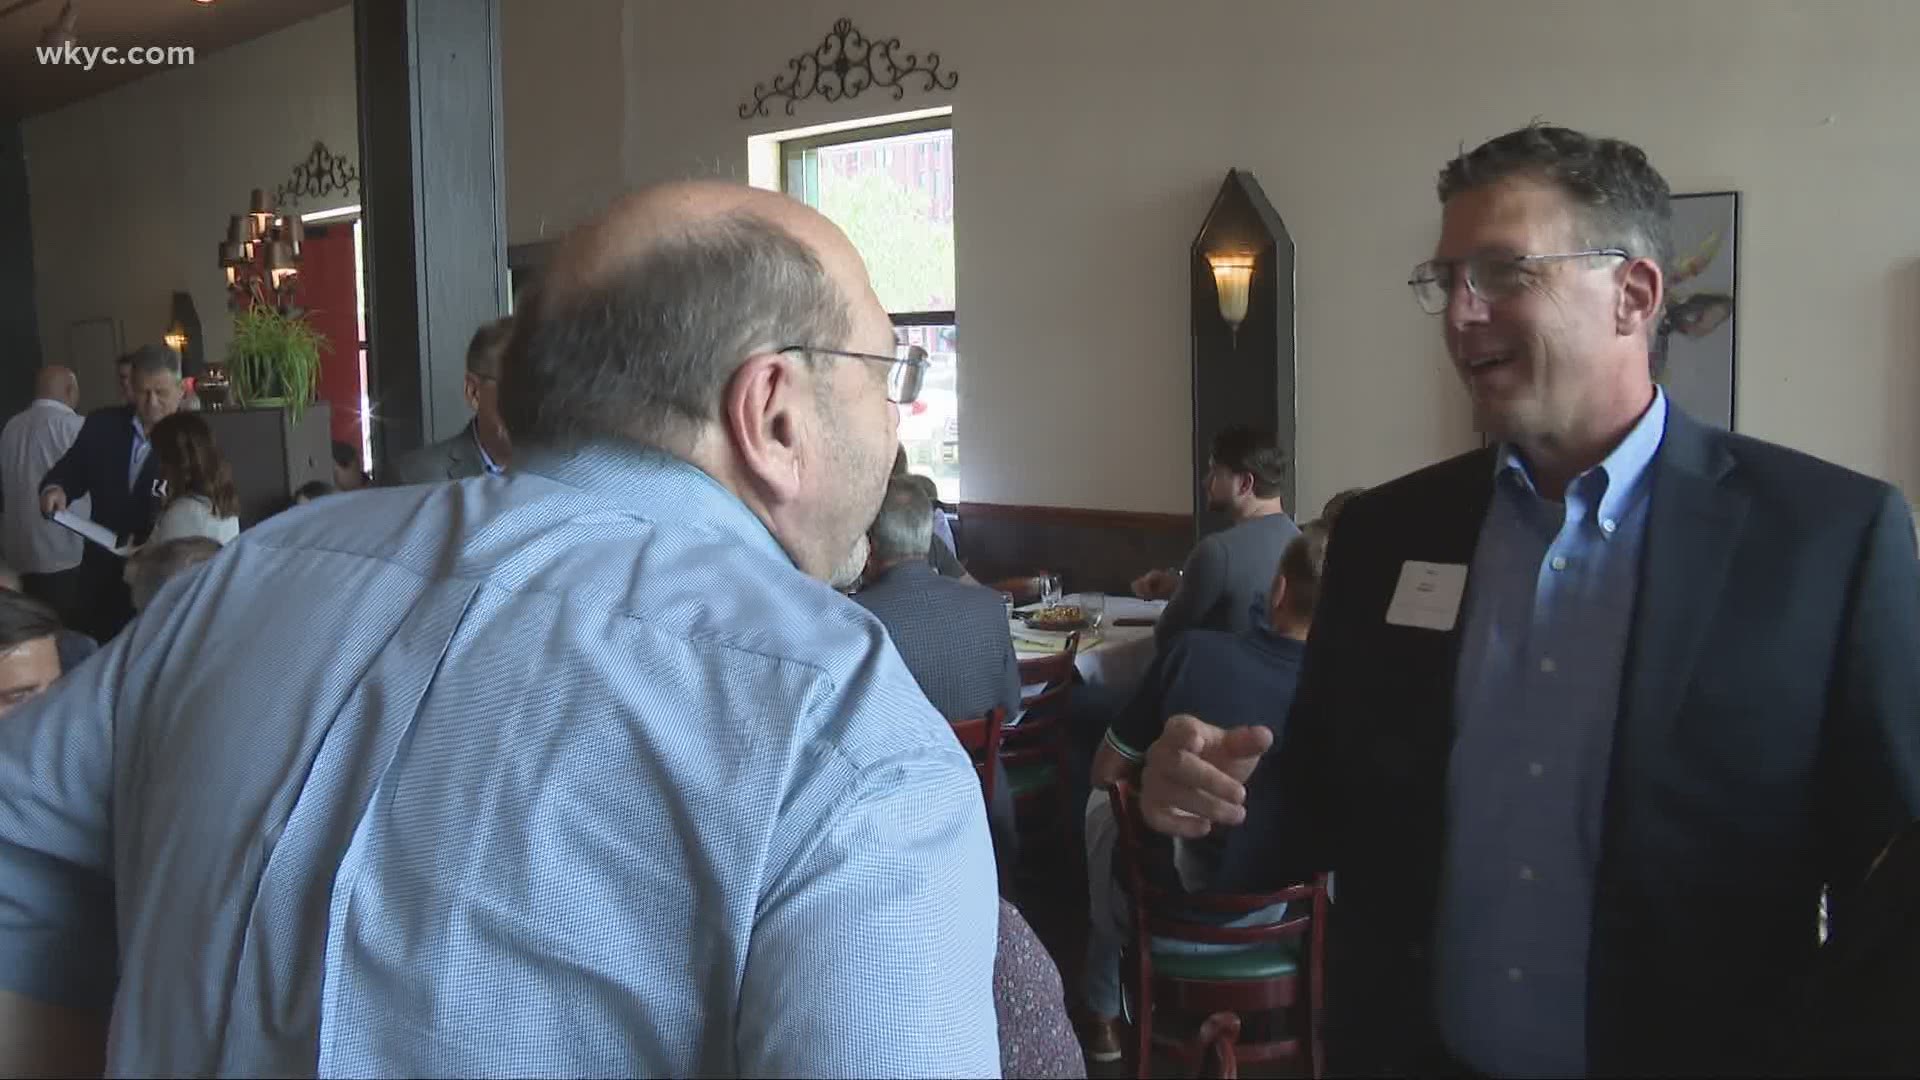 Local restaurant owners, operators, and workers, met to discuss the state of restaurants in Ohio, as we continue to settling into a new normal post-pandemic.